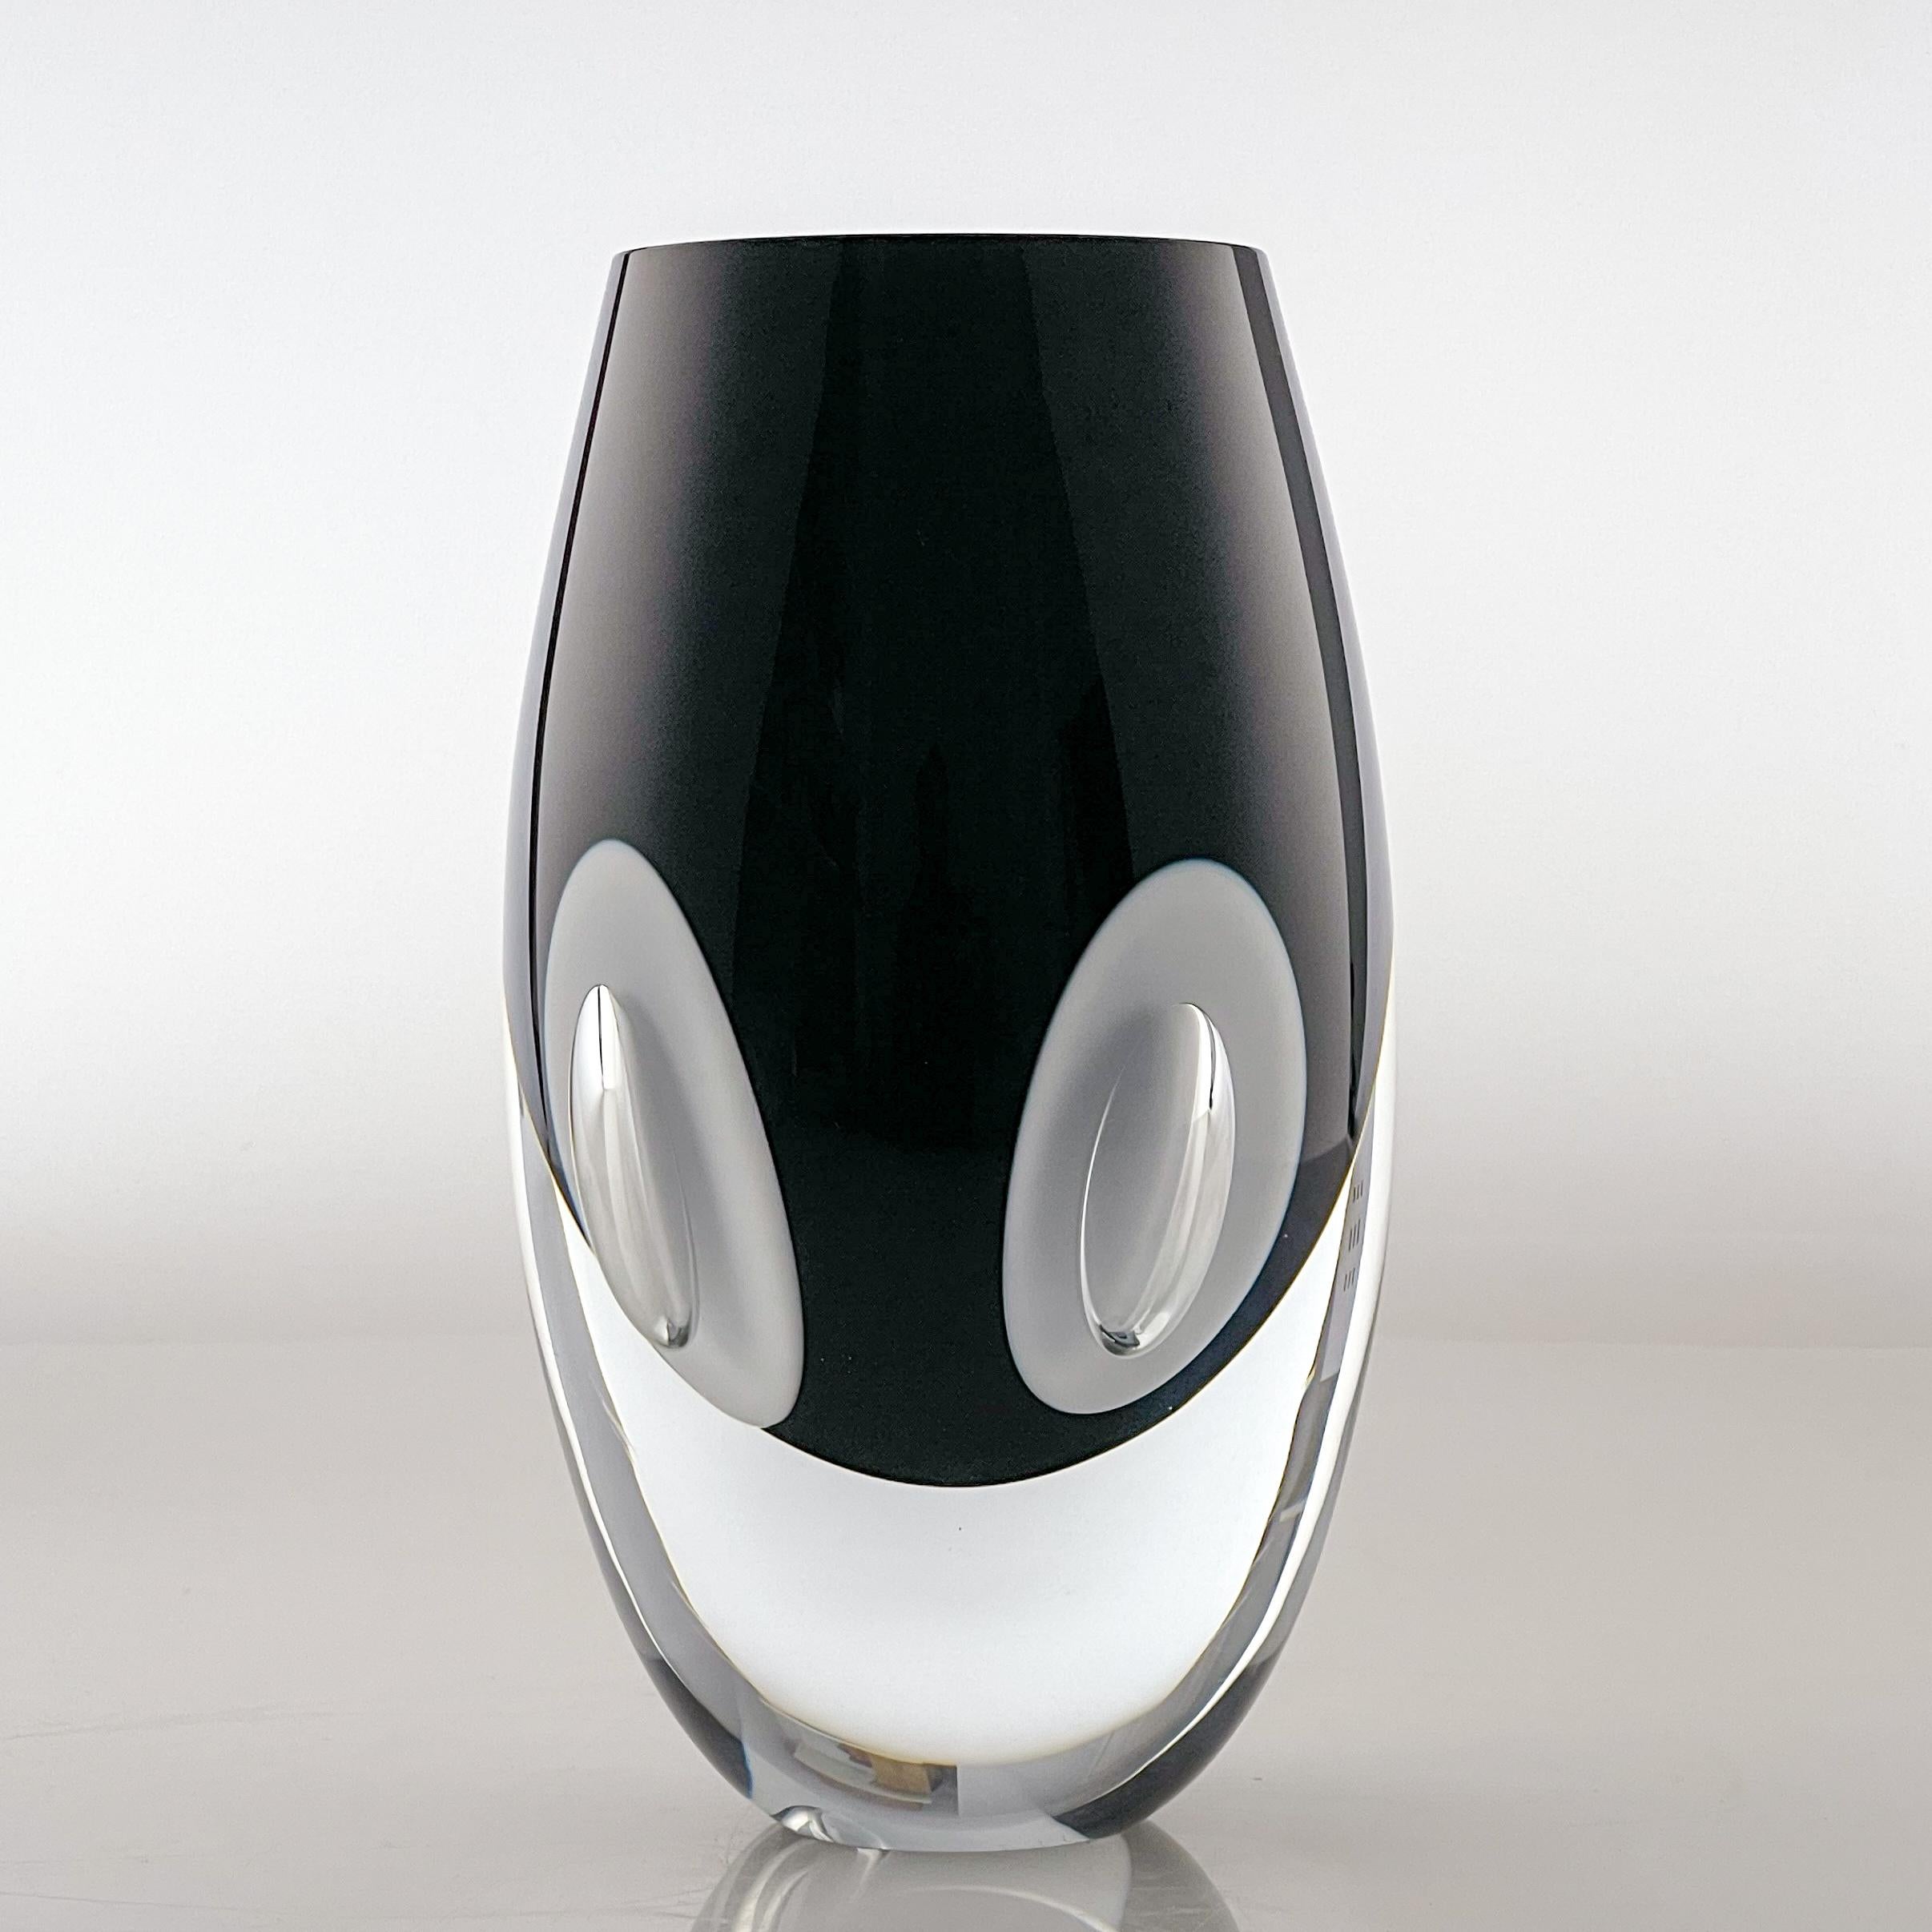 Timo Sarpaneva – Freeblown crystal Art-Object “Claritas” – Iittala, Finland 1997

A freeblown clear, white and black coloured crystal Art-object / sculpture “Claritas”. Designed by famous Finnish artist Timo Sarpaneva in 1983-1984 and executed by